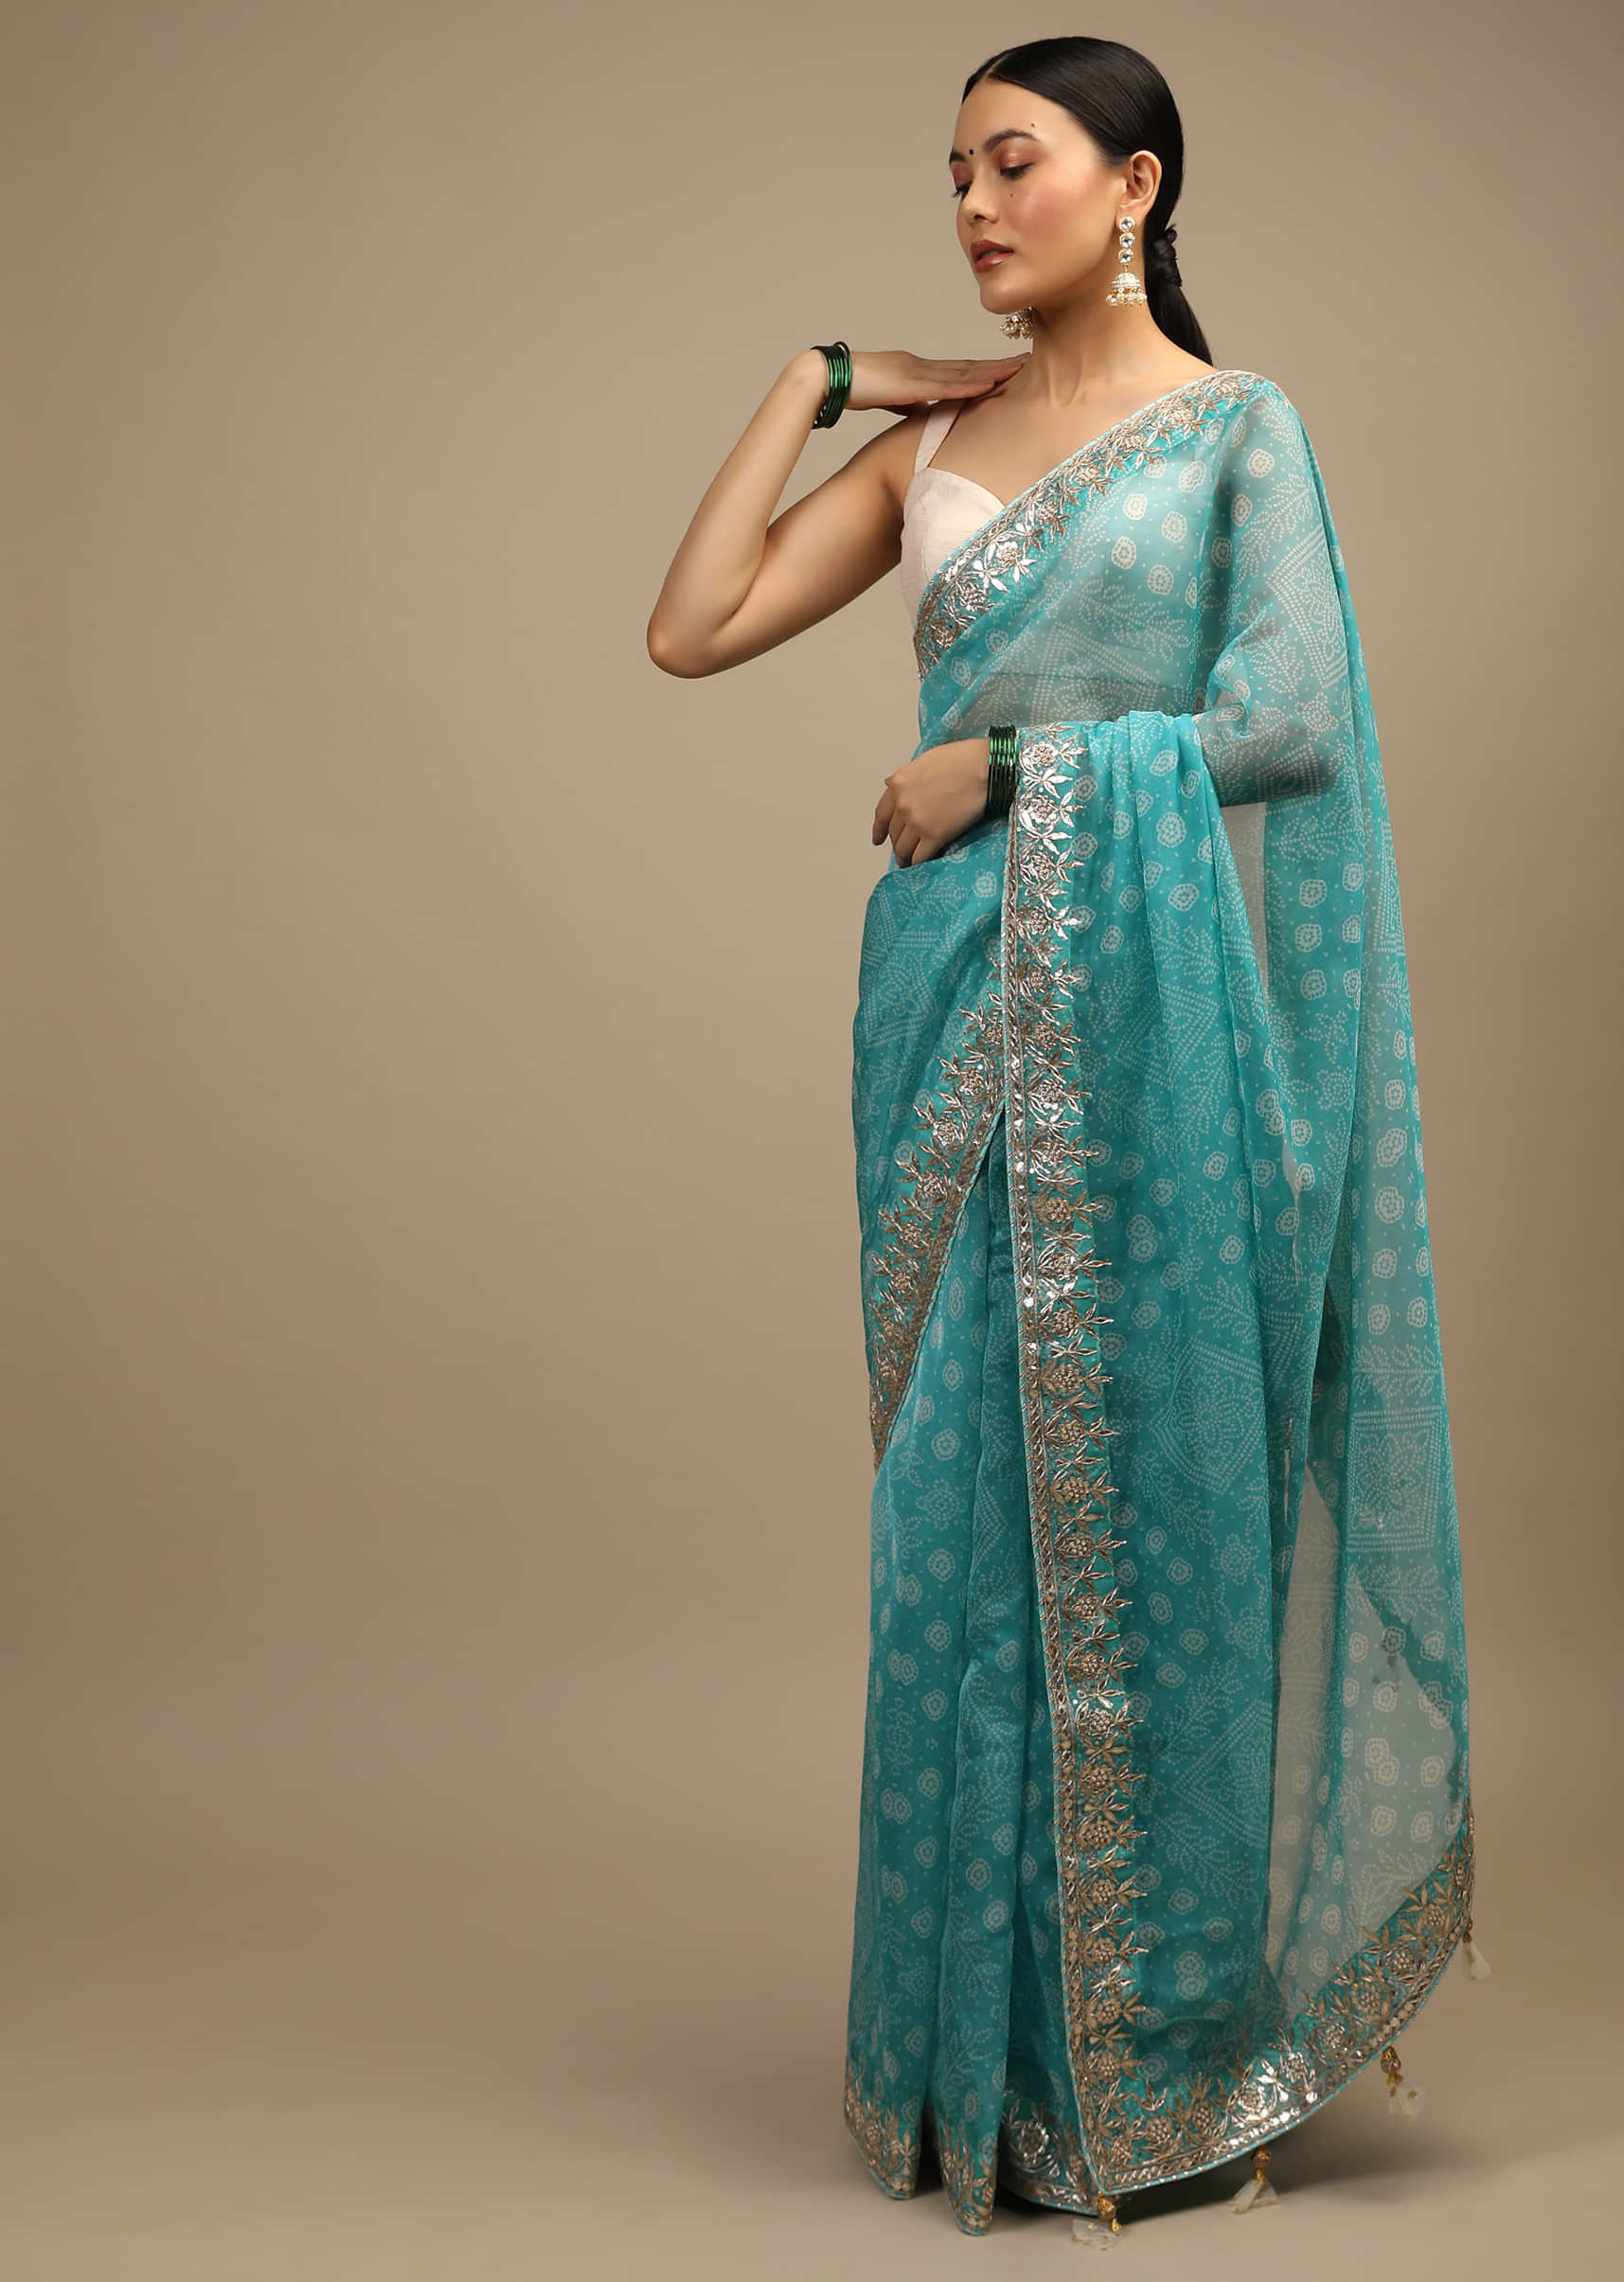 Sky Blue Saree In Organza With Bandhani Print In Floral And Geometric Motifs Along With Gotta Patti Accented Border  